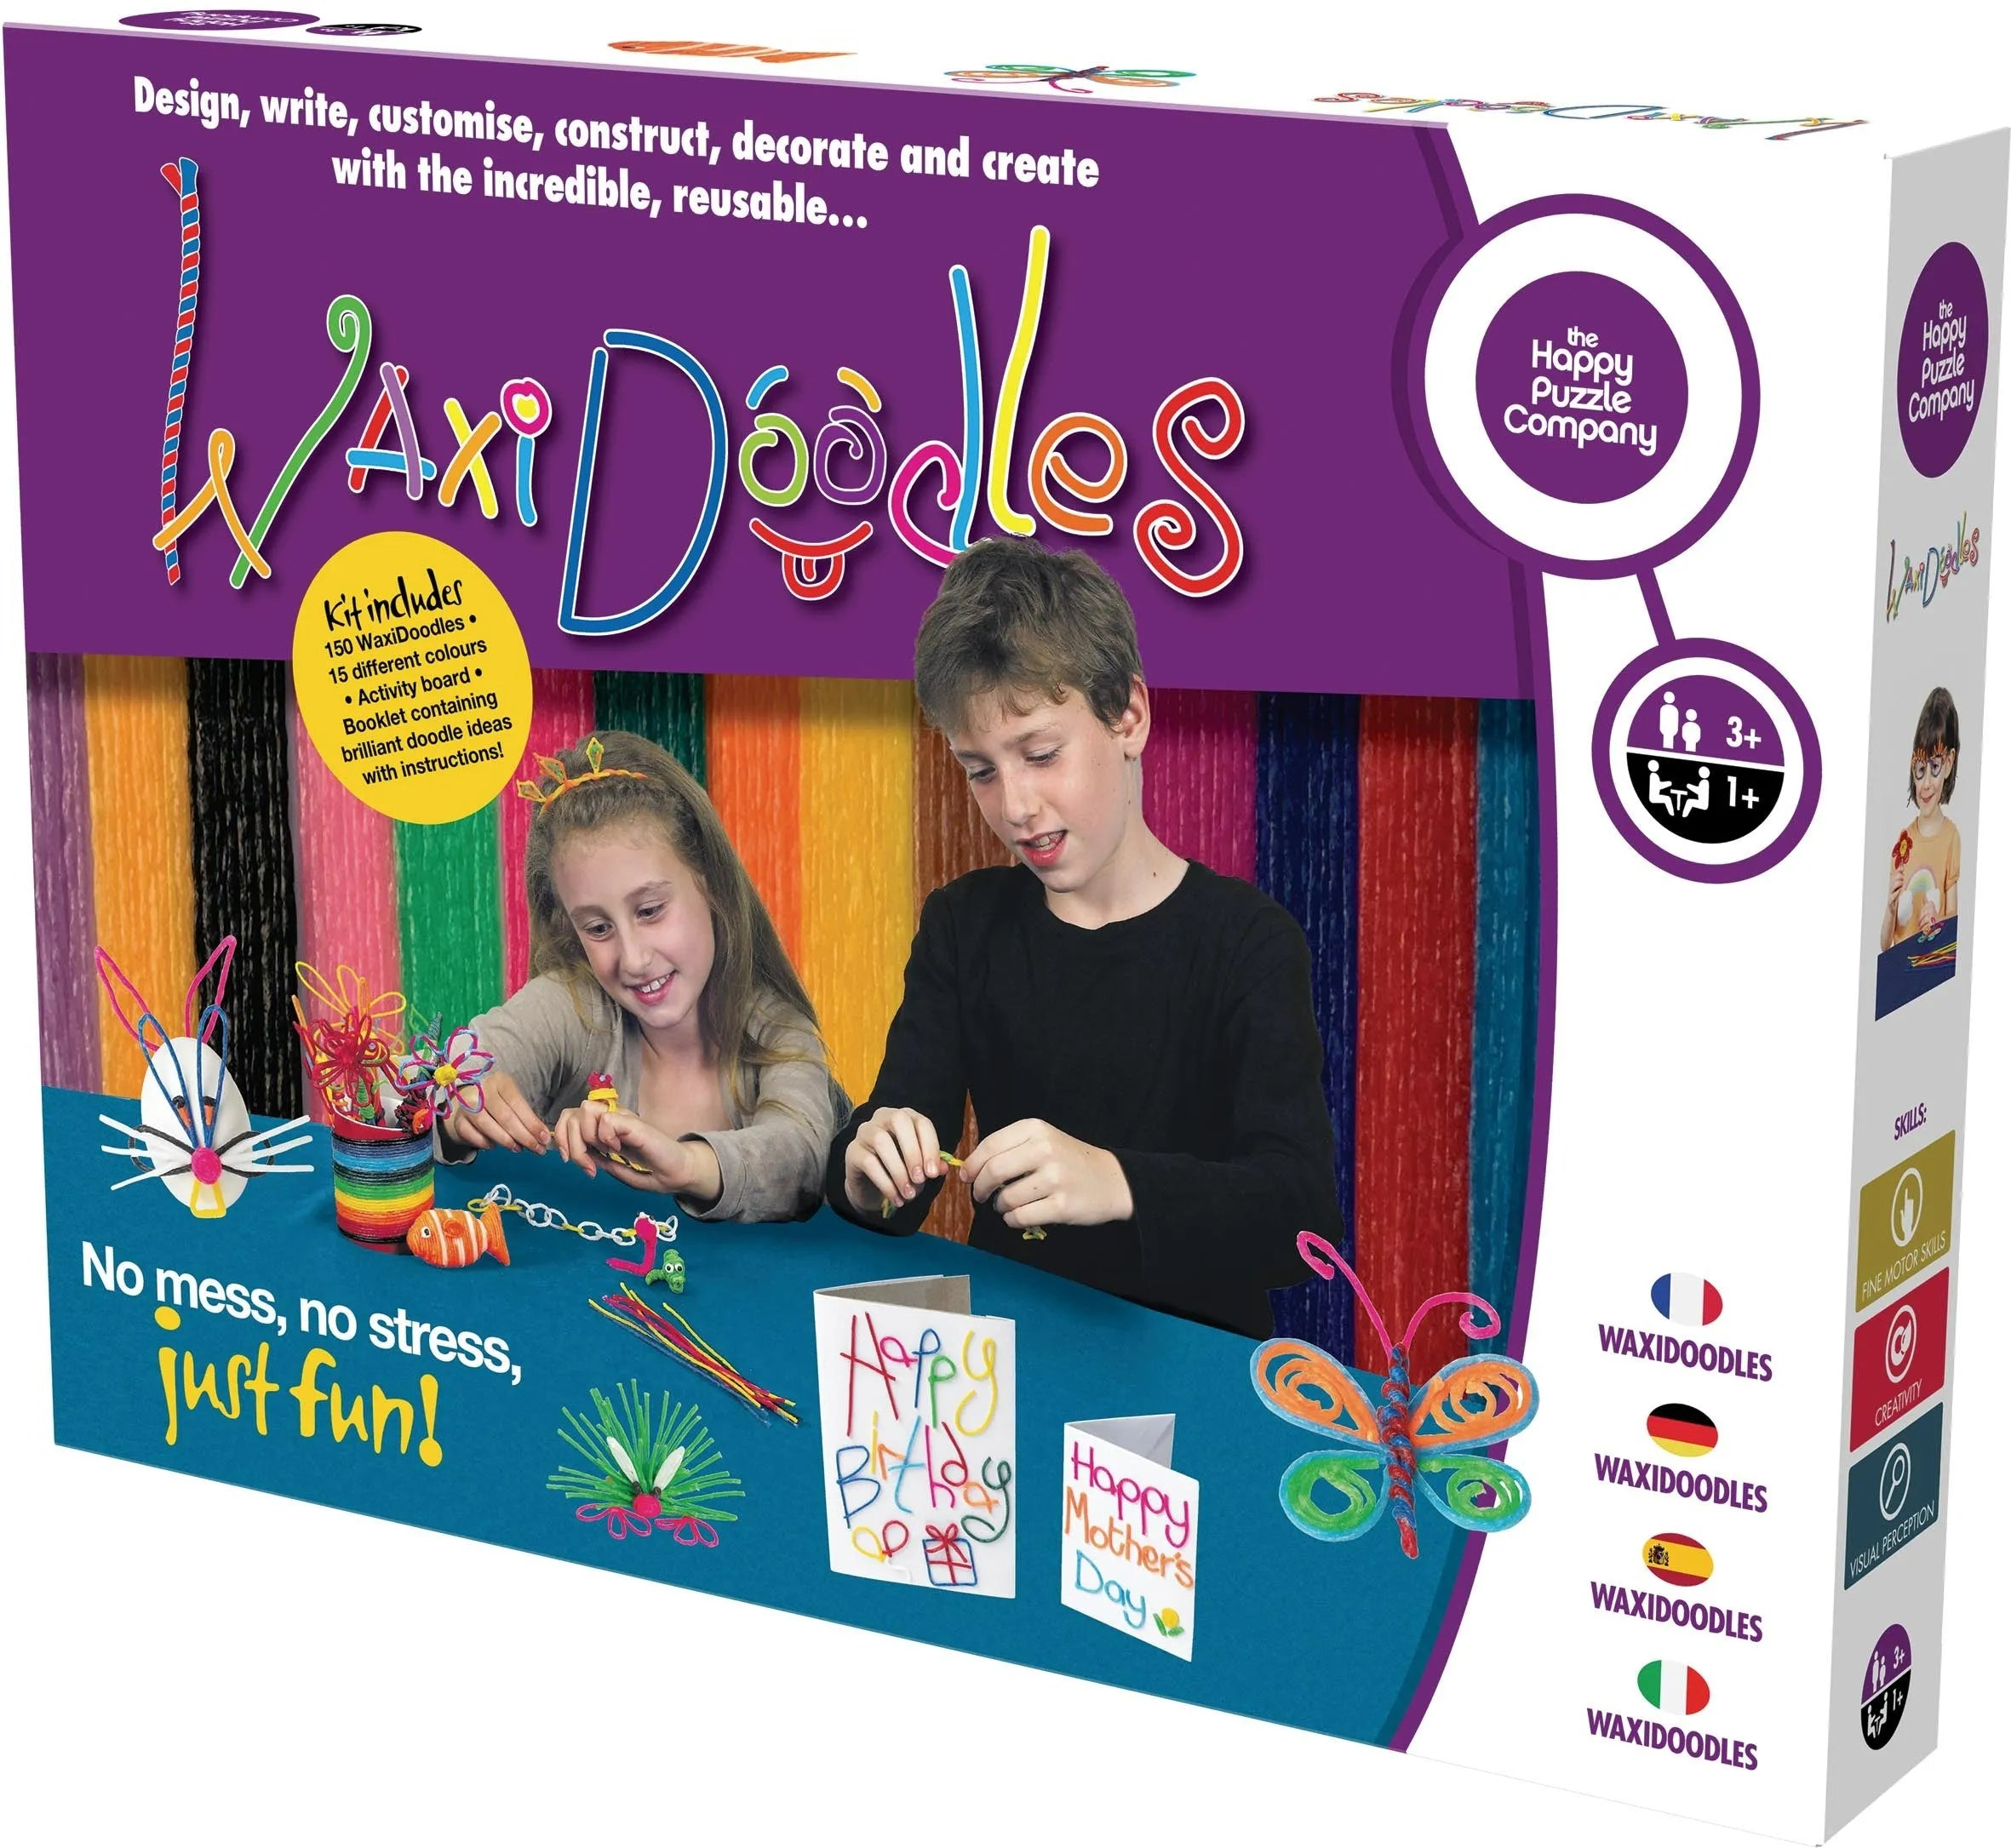 Shop Art & Craft activity kits for kids - Waxidoodles - Happy Puzzle Company toys for kids